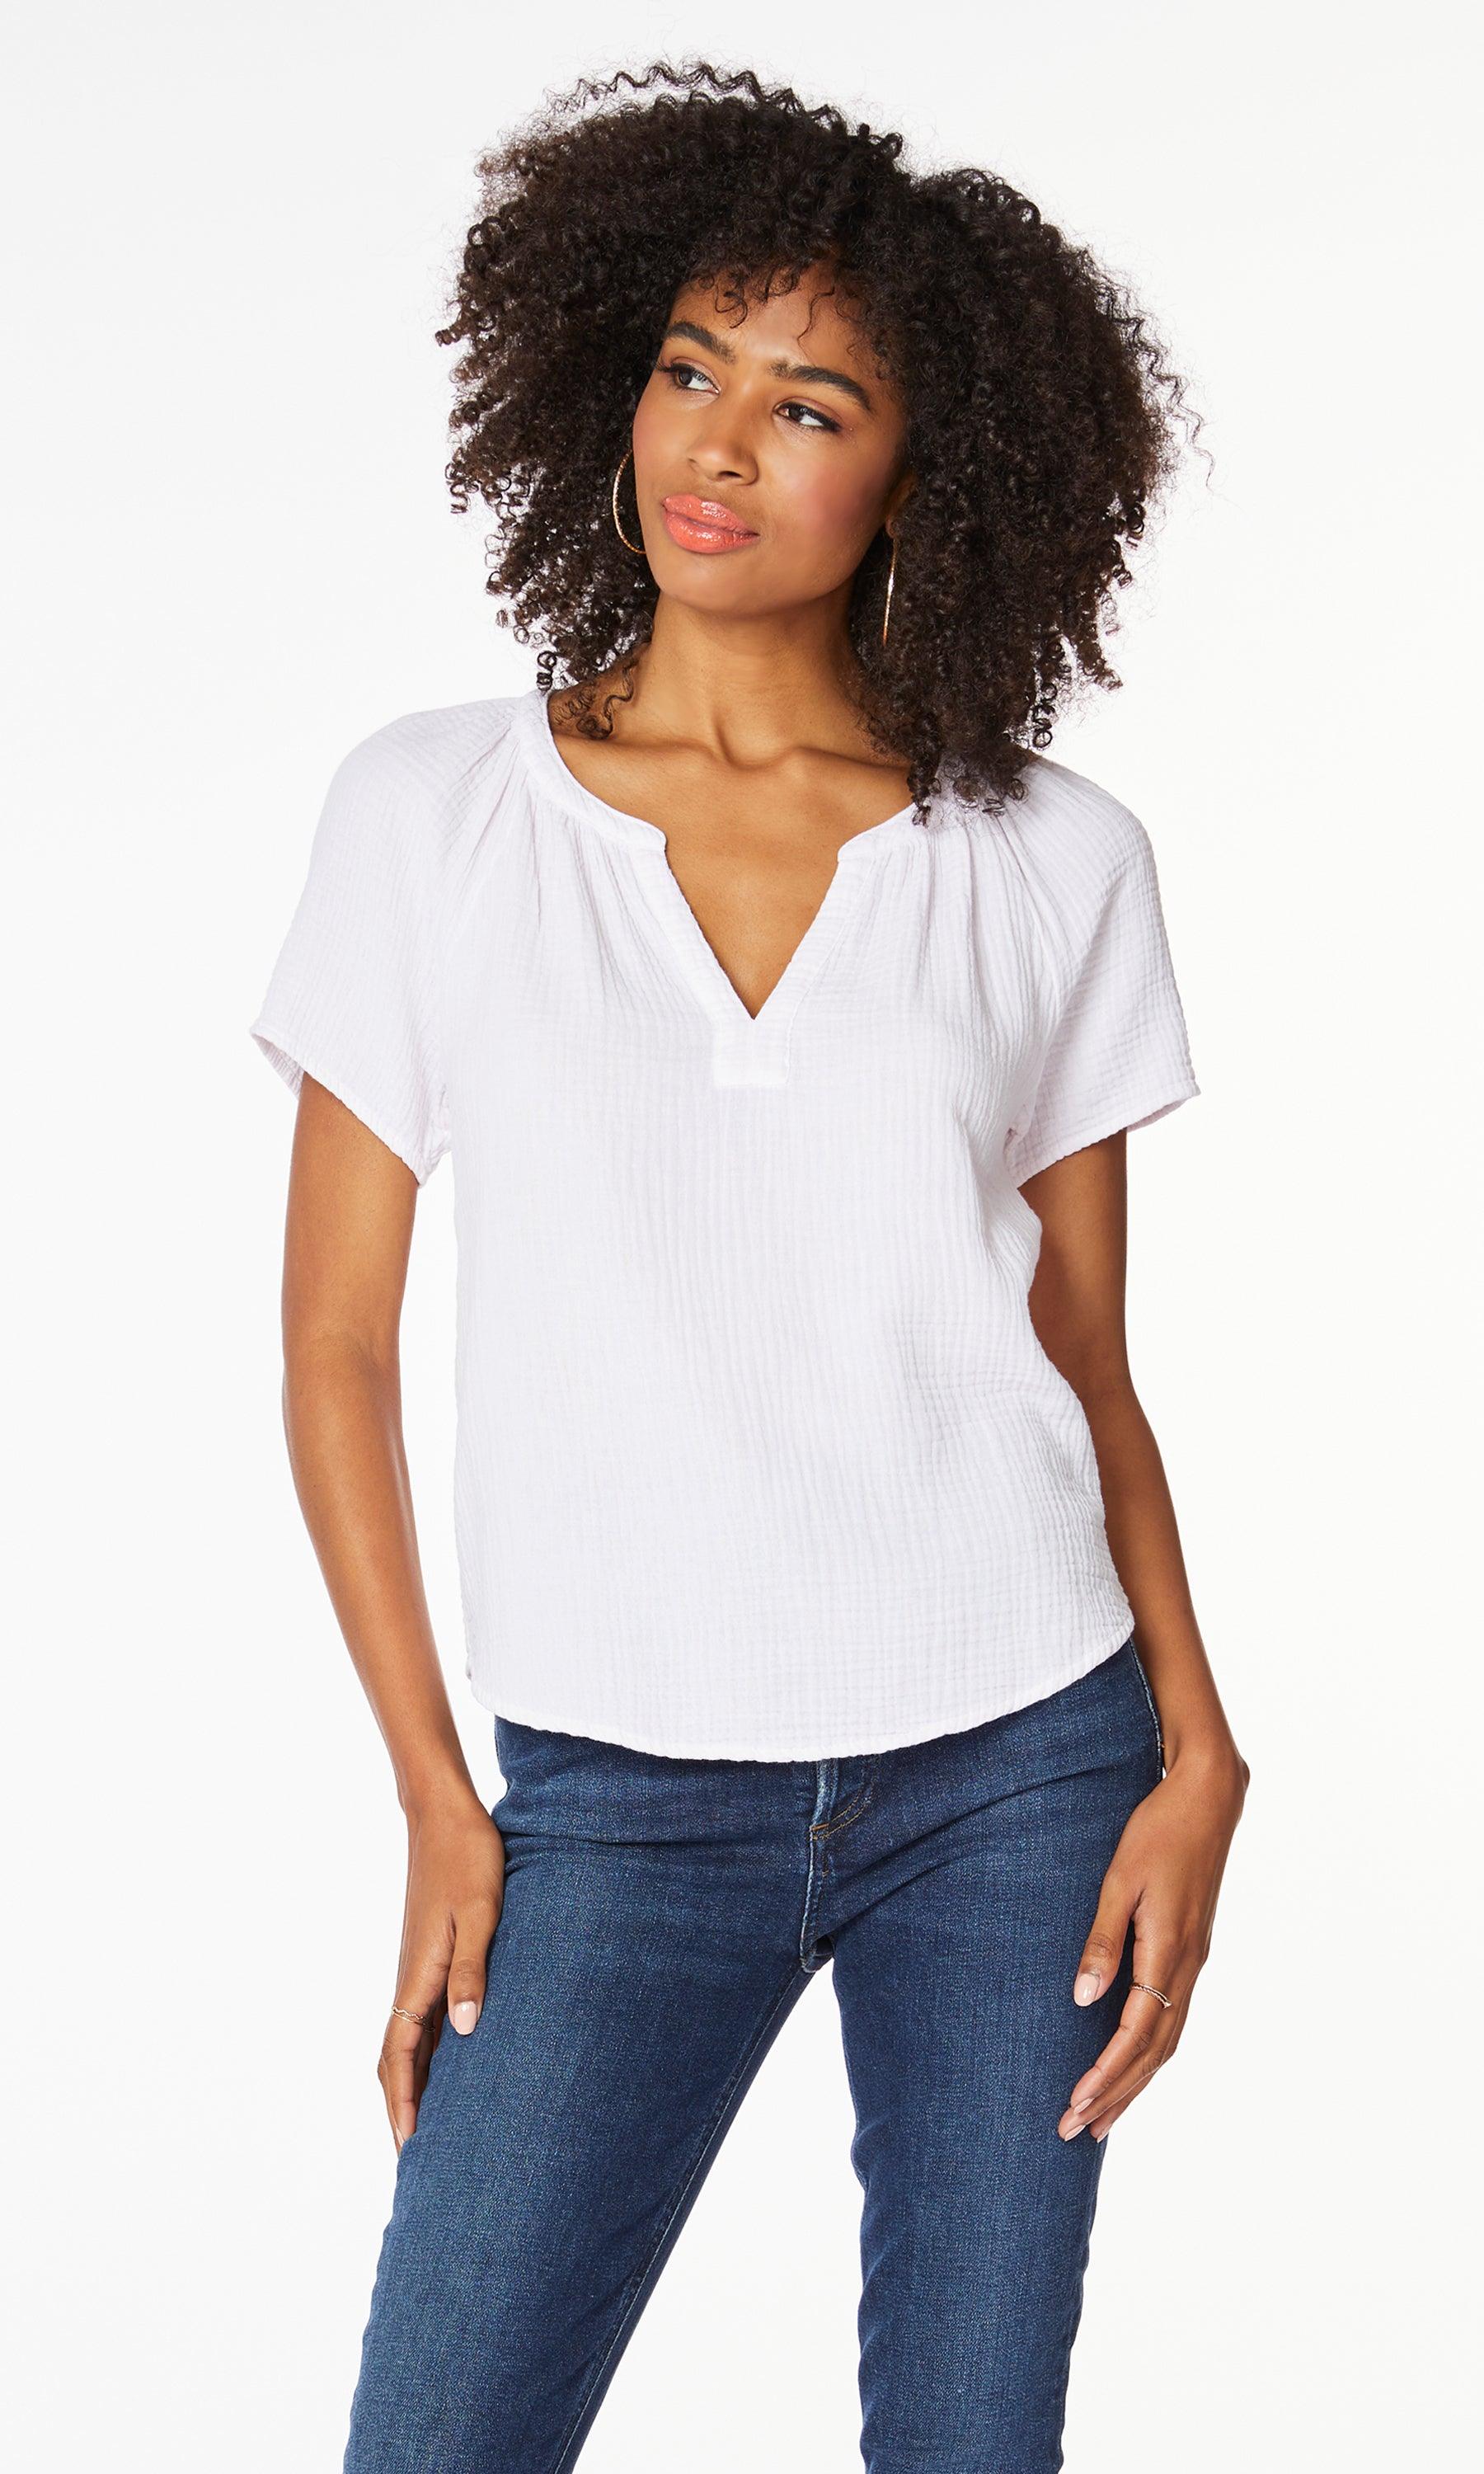 This boho-inspired top is made in our bestselling medium-weight gauze, with feminine shirring details at the neck, flutter sleeve, and a split neck placket.